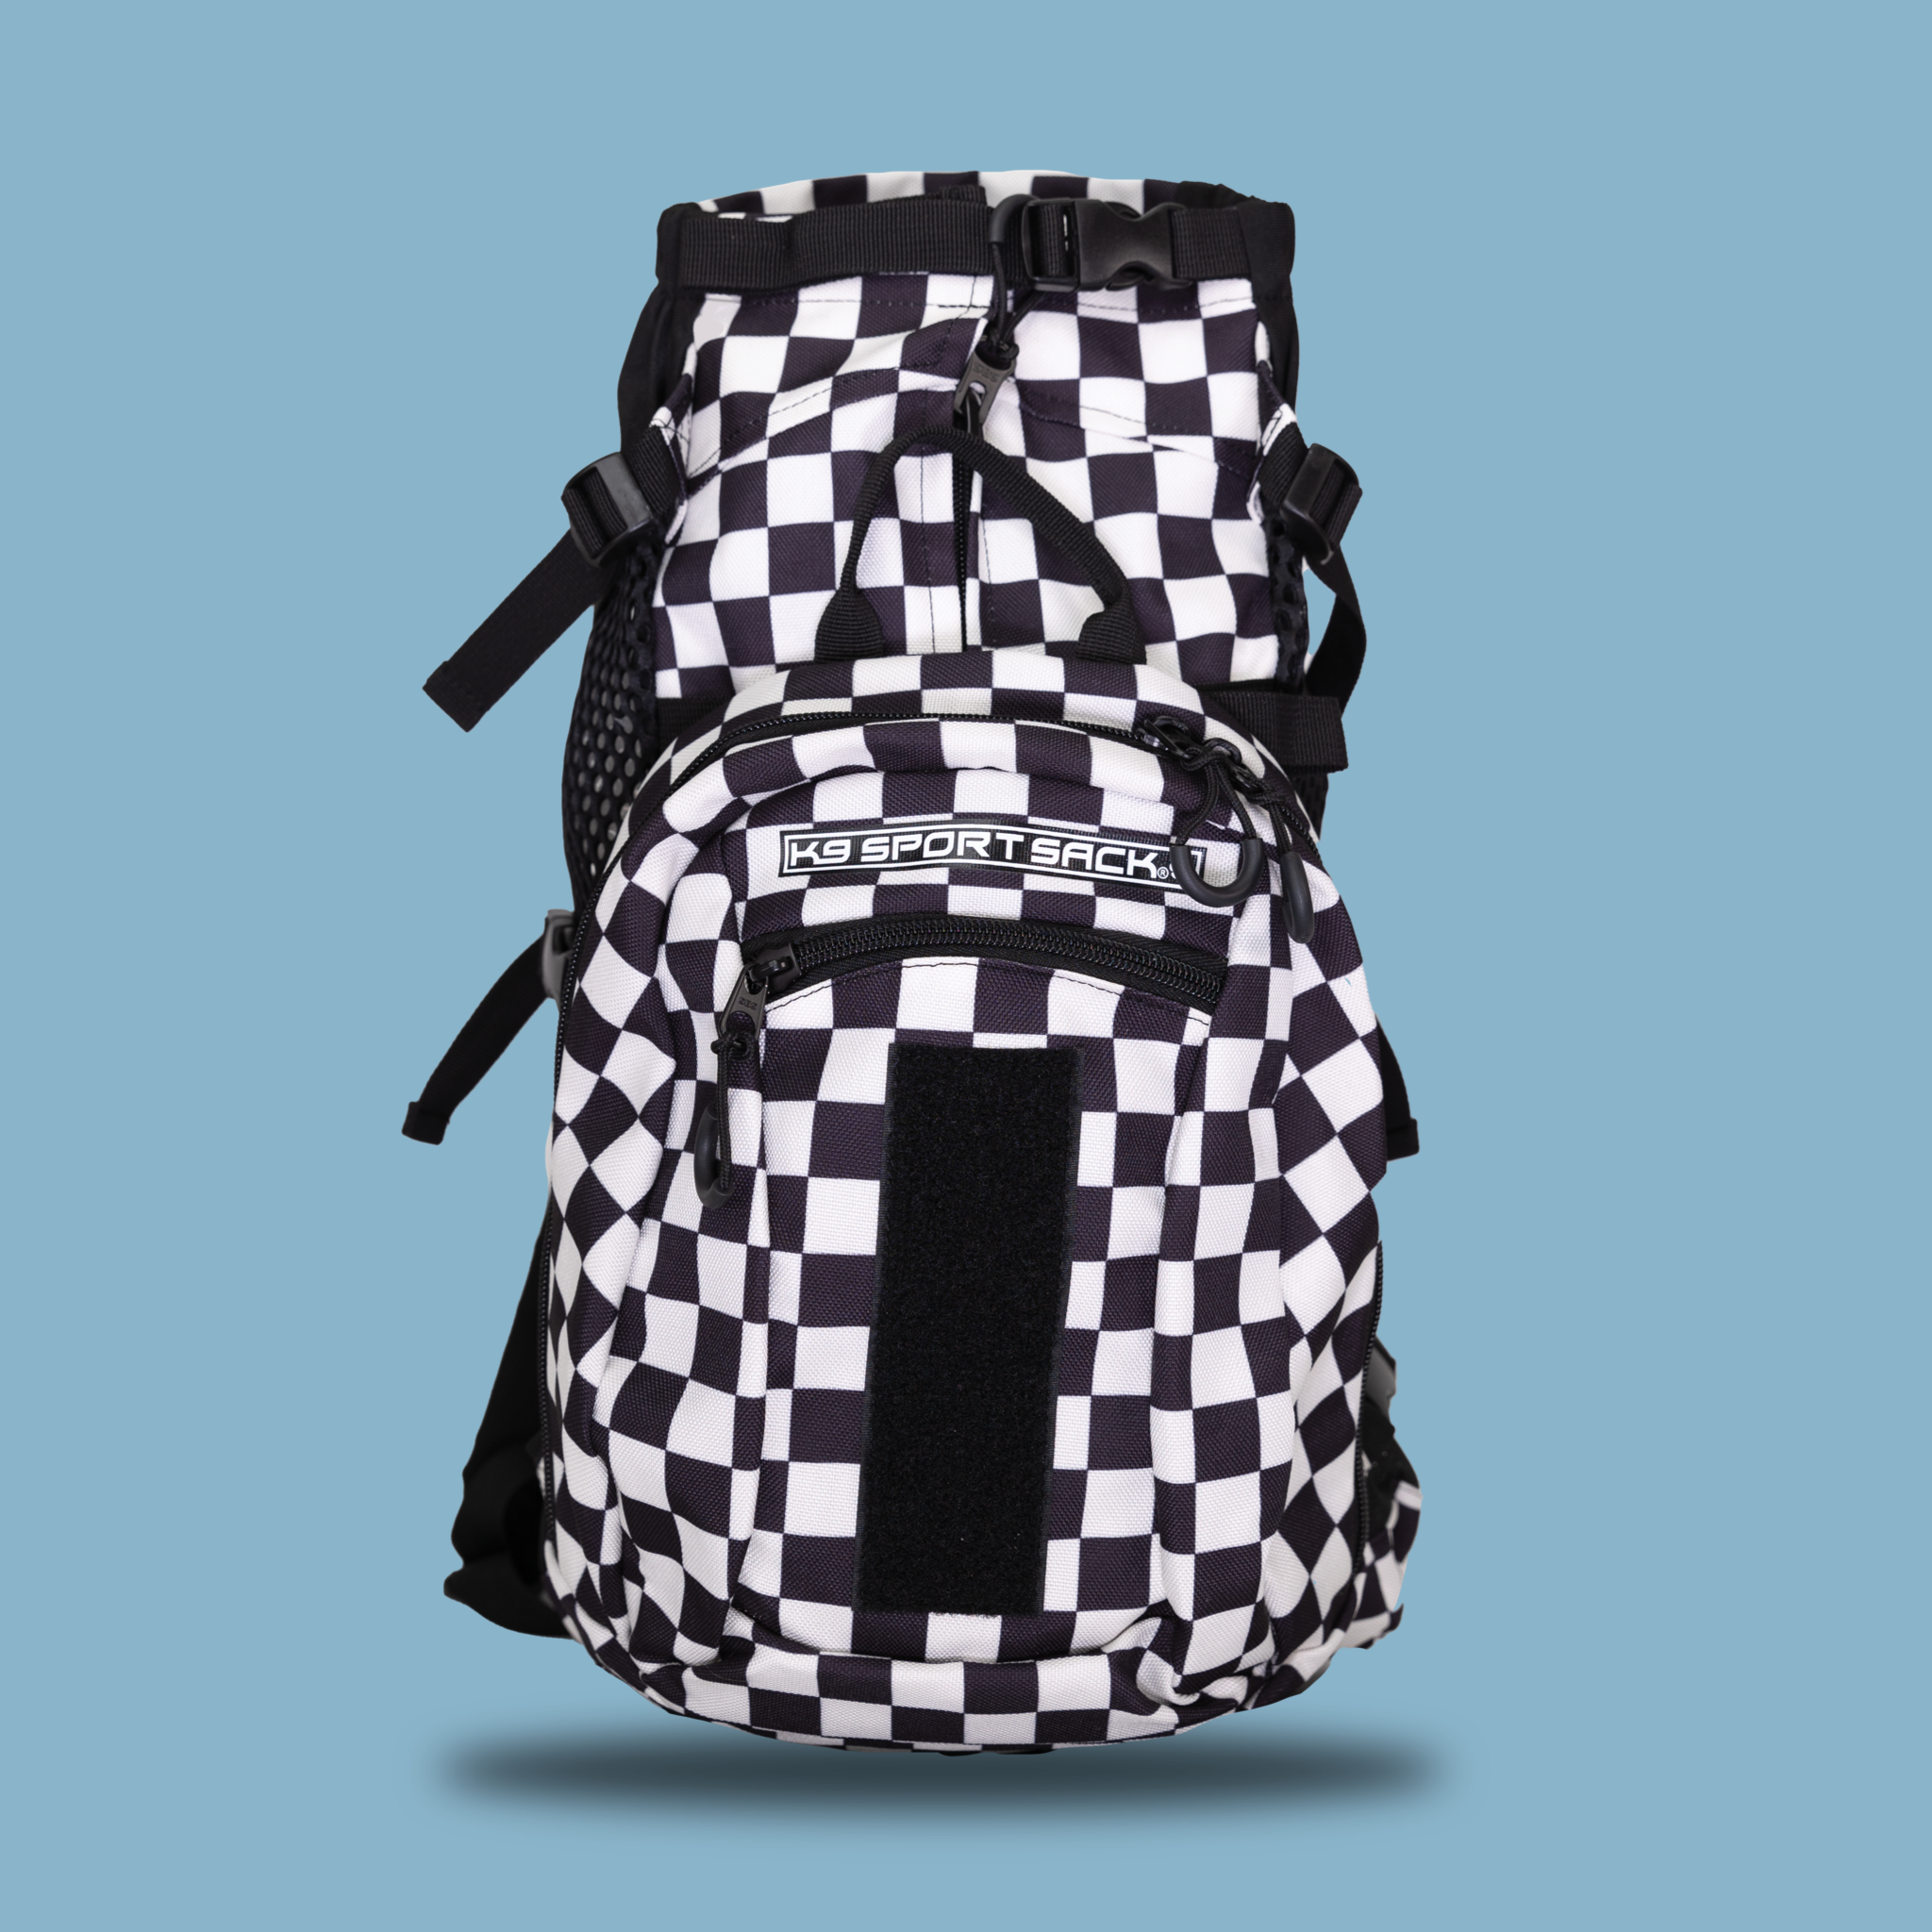 PLUS2_Checkers_Back_Shopify_31f7d87a-41e4-48b1-8c19-e77d490cb3b1.png